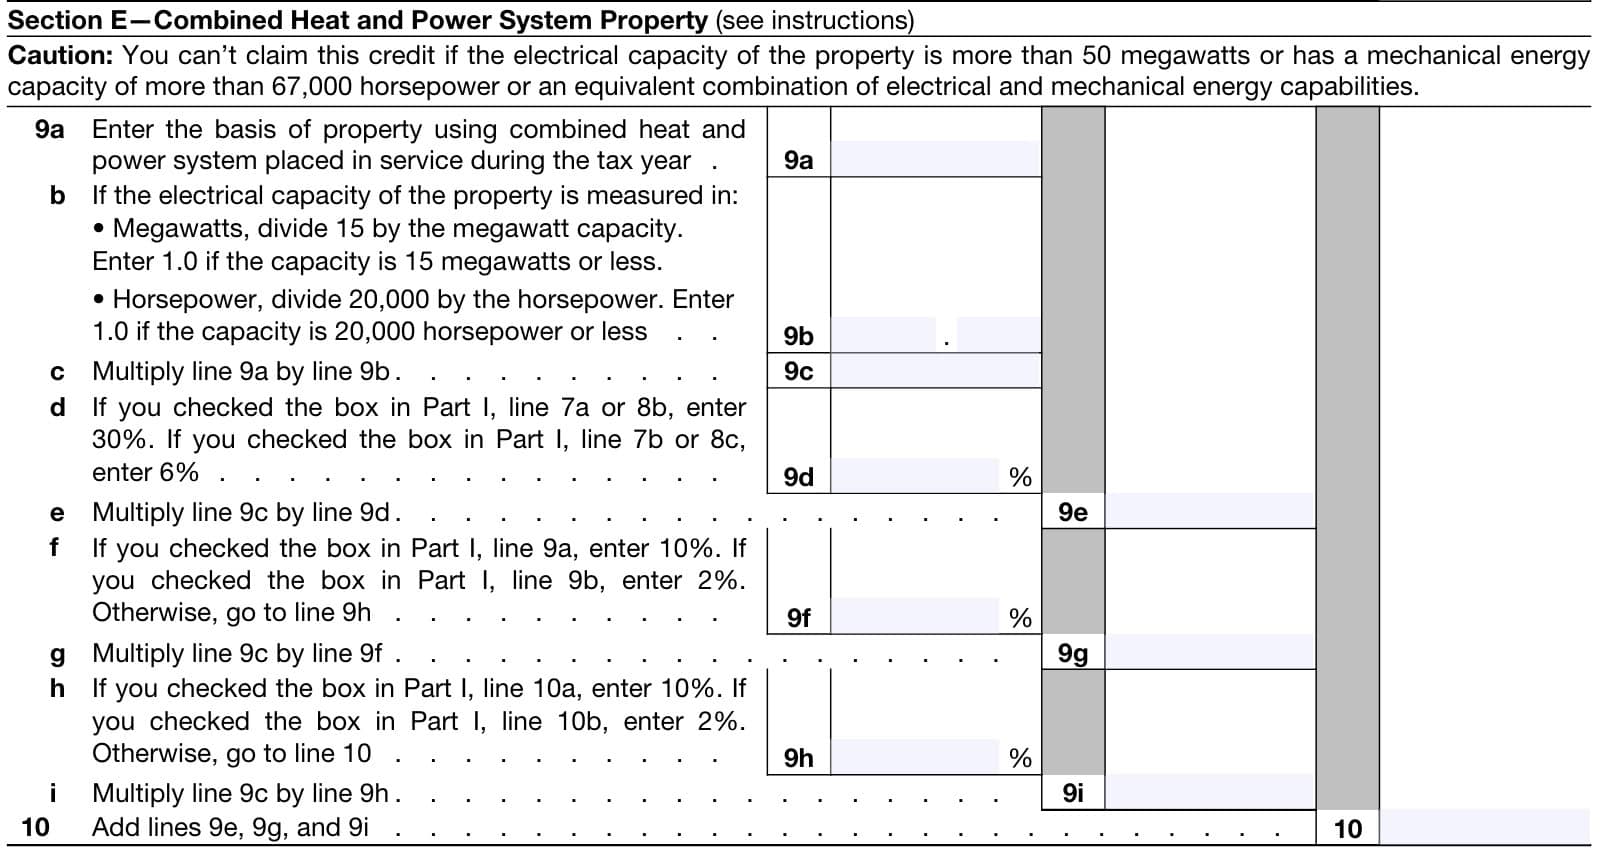 irs form 3468, part vi, section e: combined heat and power system property